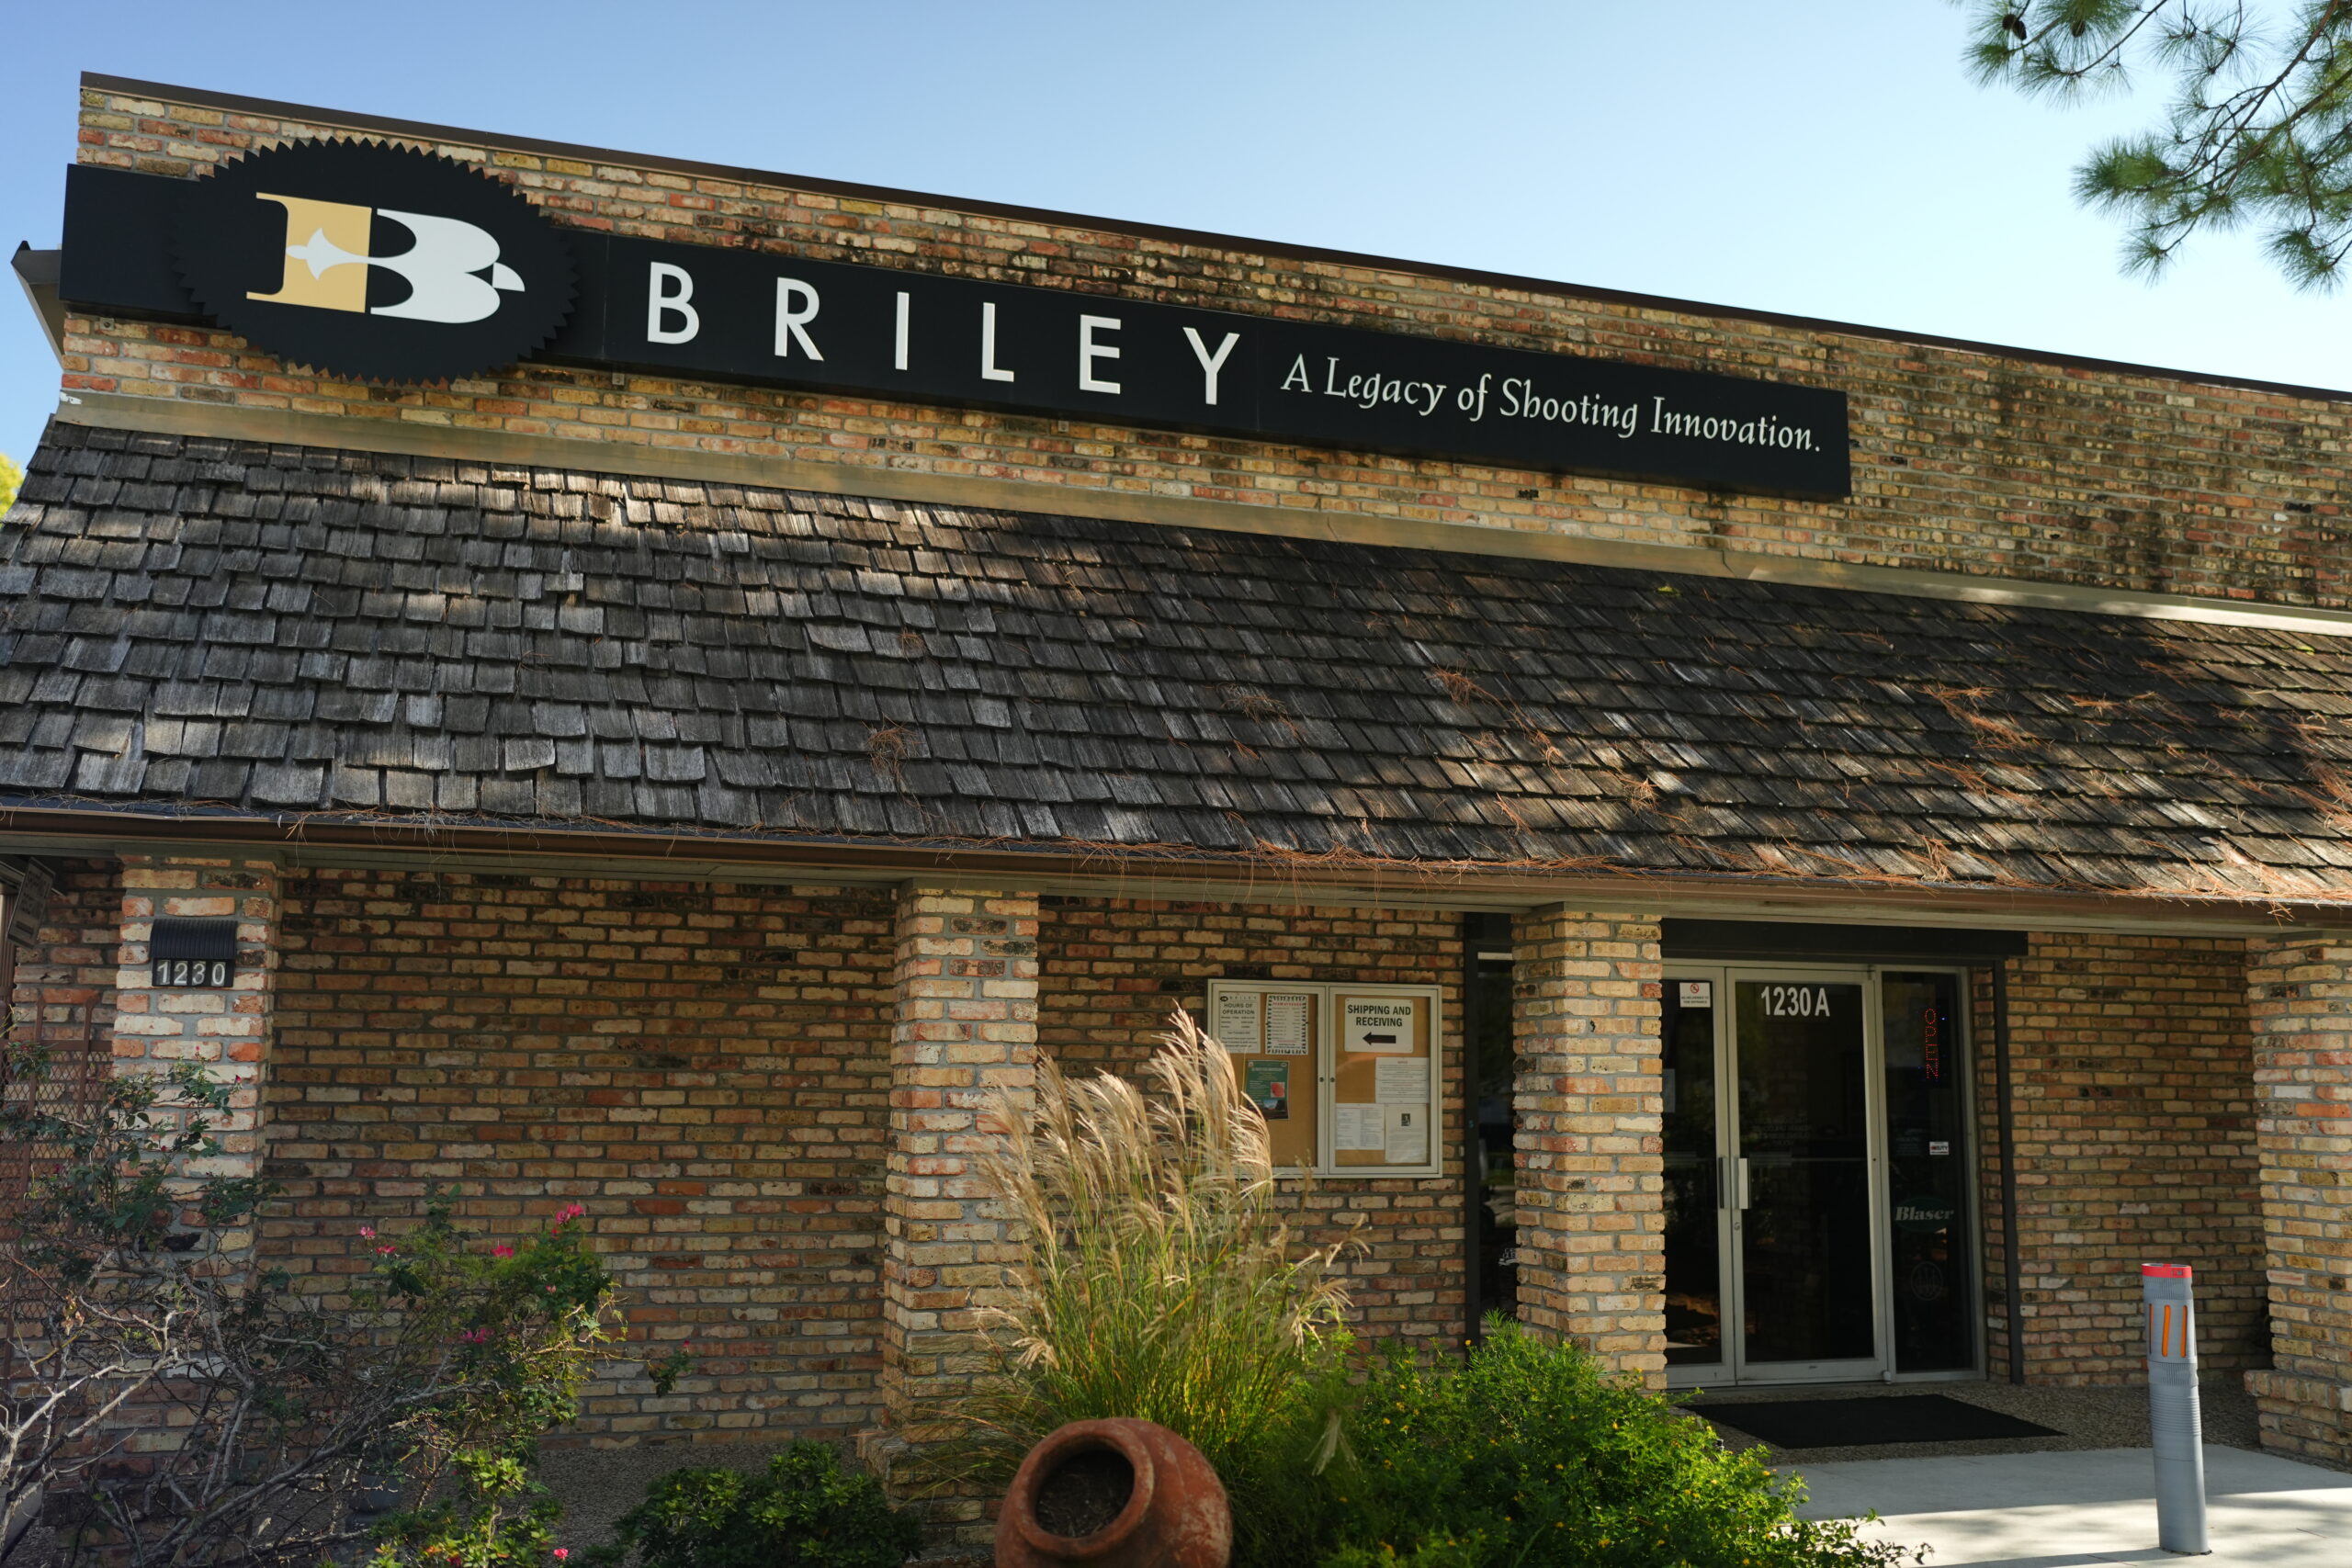 Briley Manufacturing Company: A Comprehensive Exploration of Precision, Innovation, and Sporting Excellence in Firearms